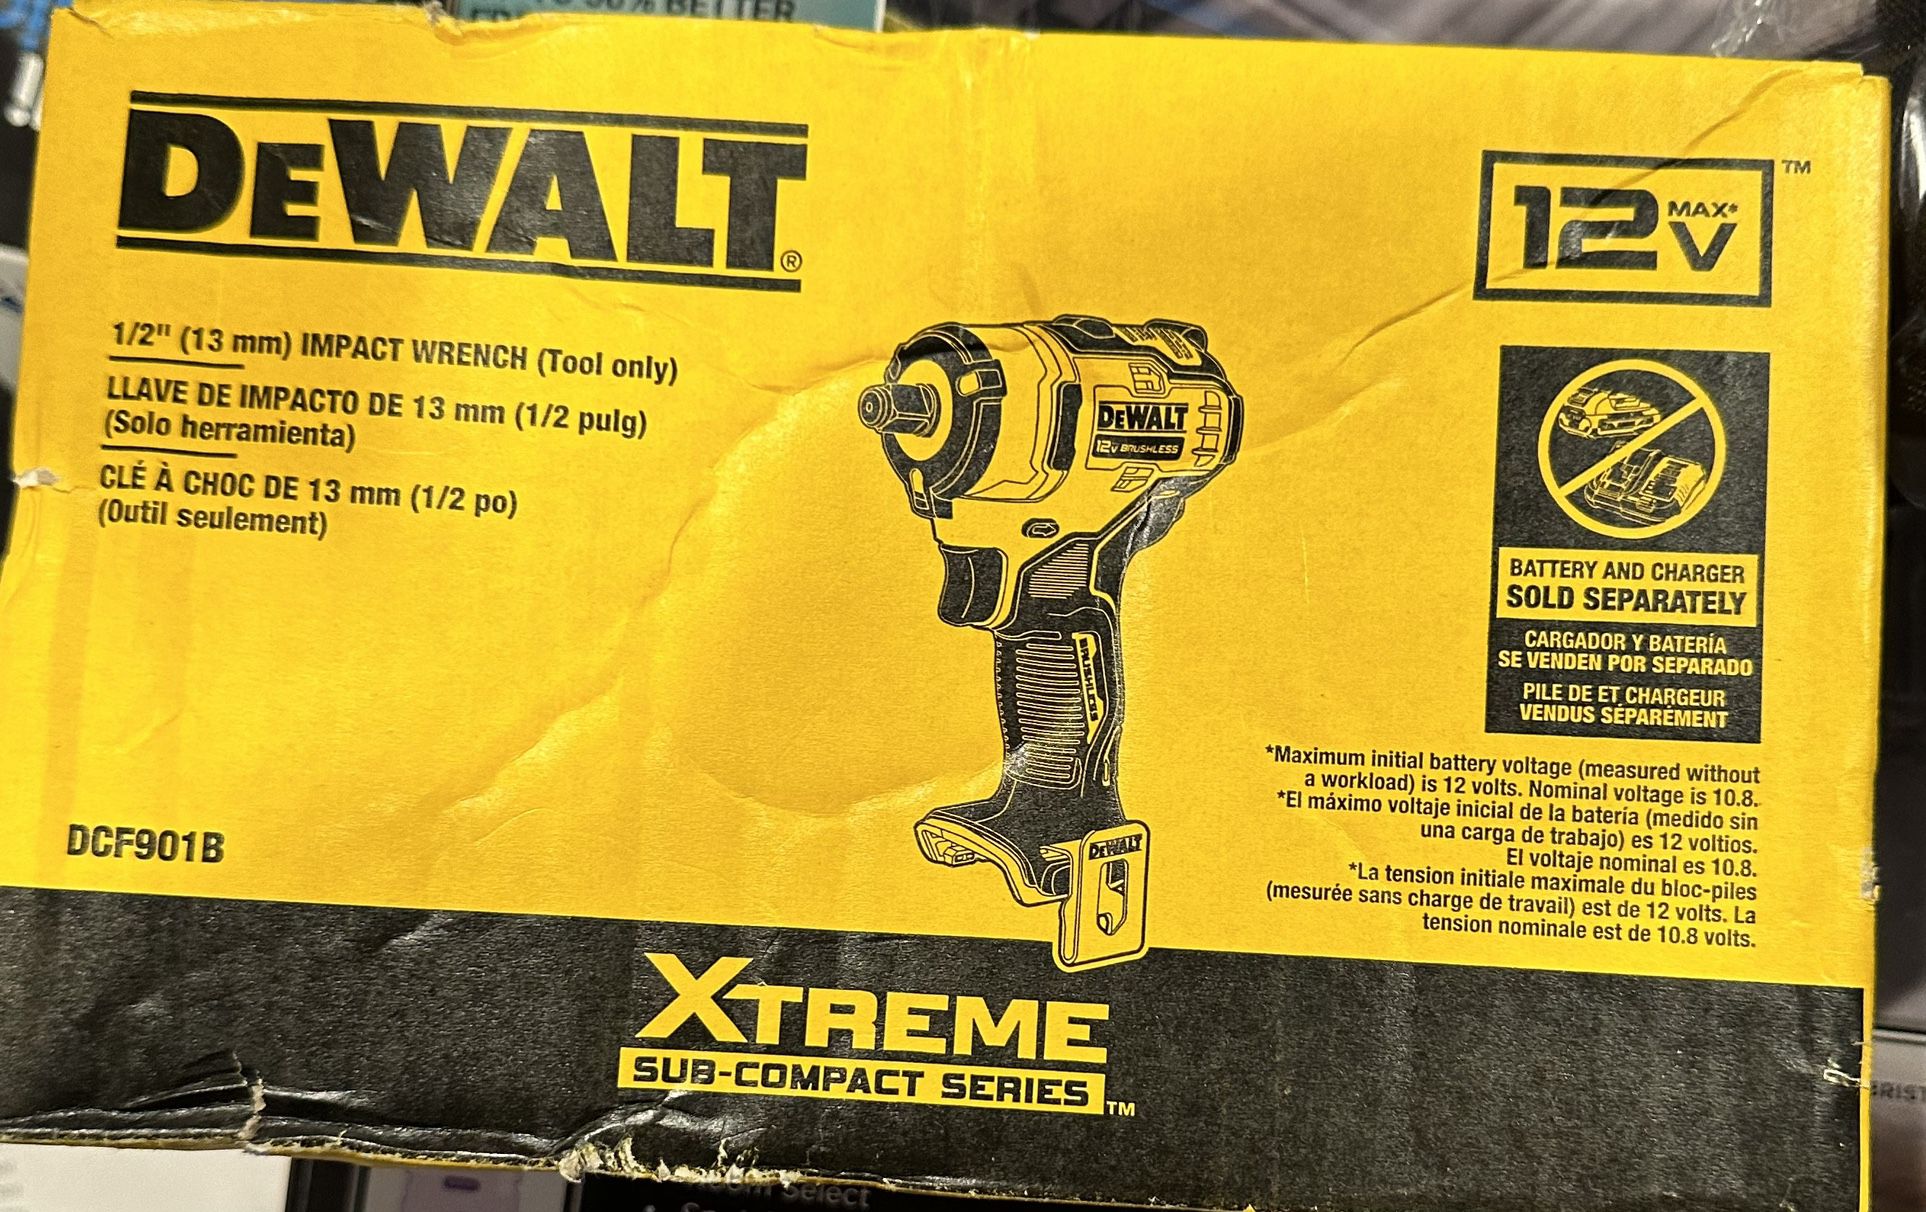 DEWALT XTREME 12-volt Max Variable Speed Brushless 1/2-in Drive Cordless Impact Wrench (Bare Tool)